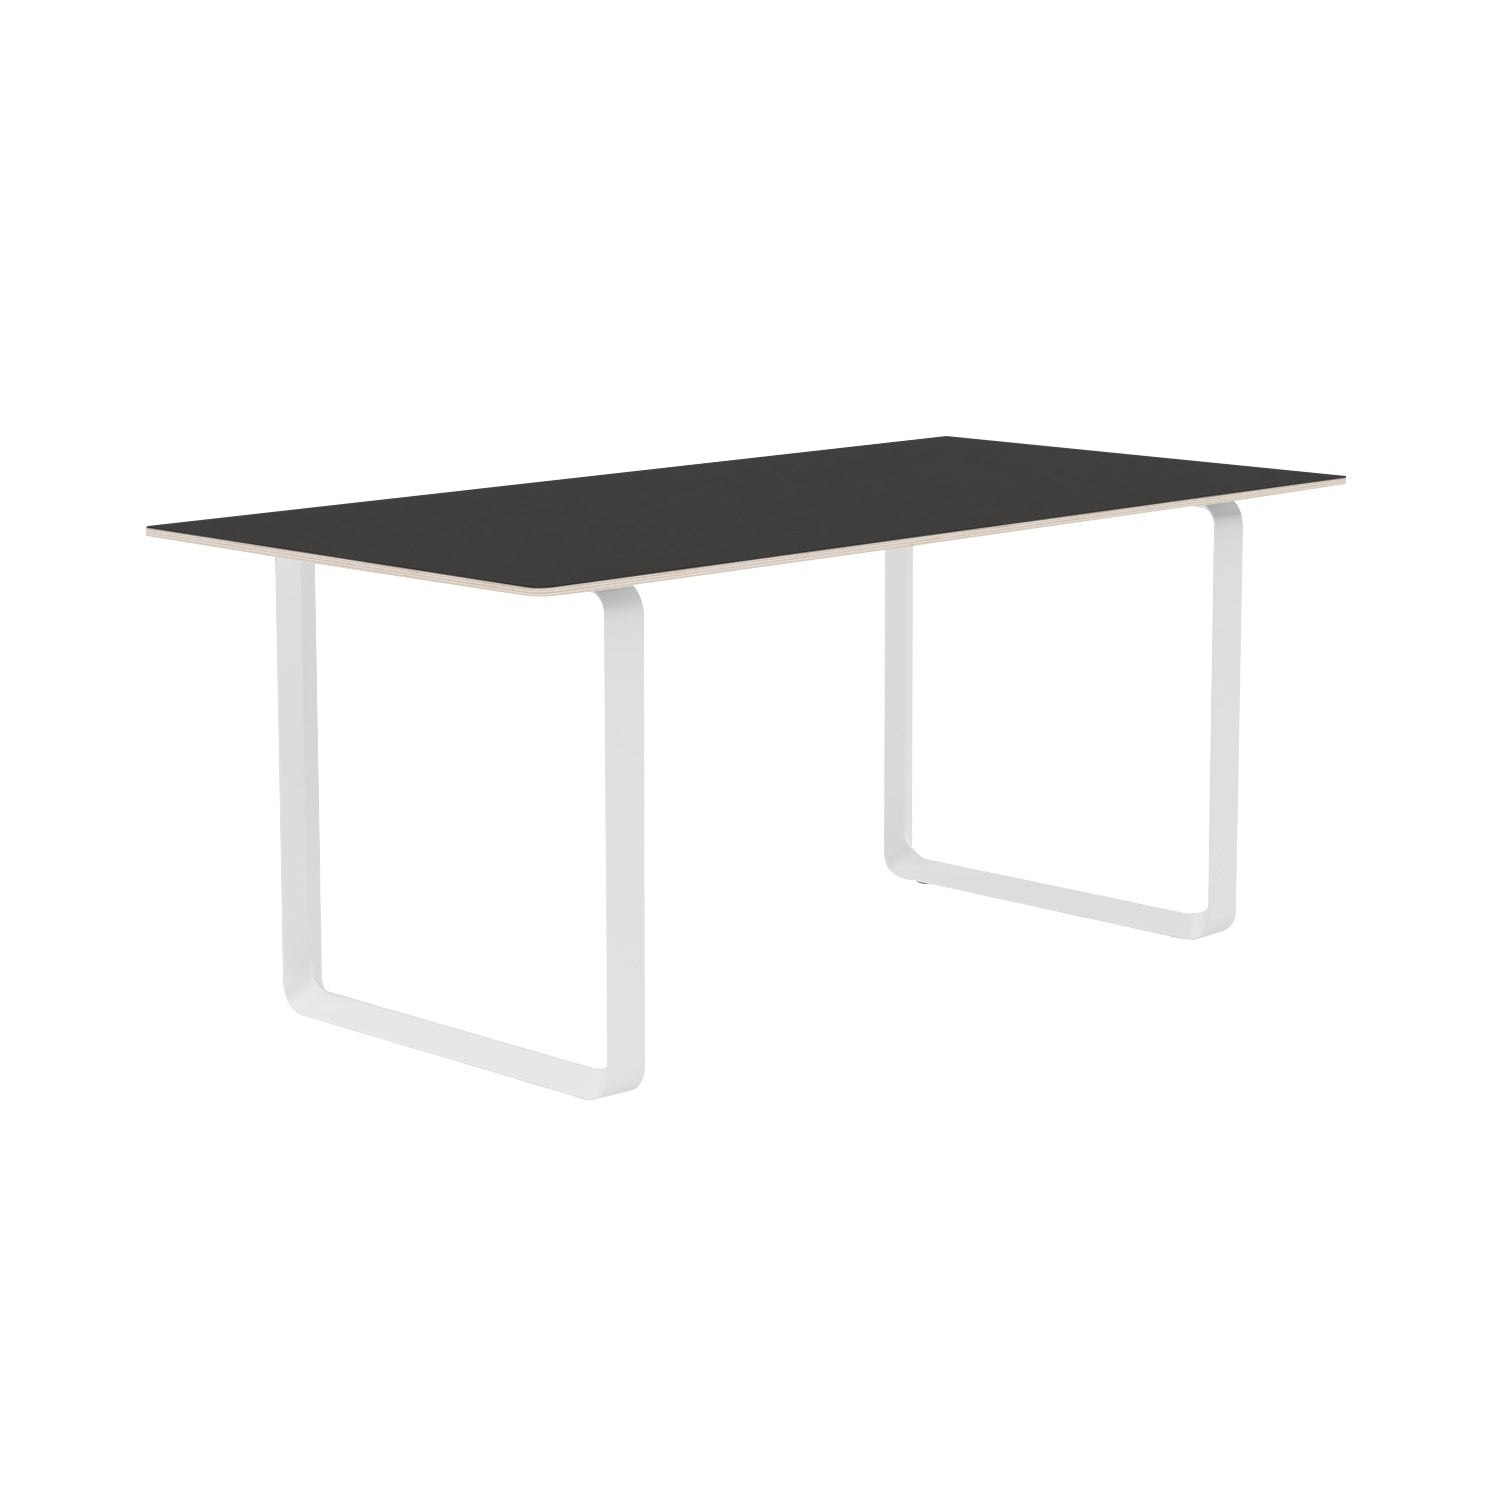 70/70 Table: Small